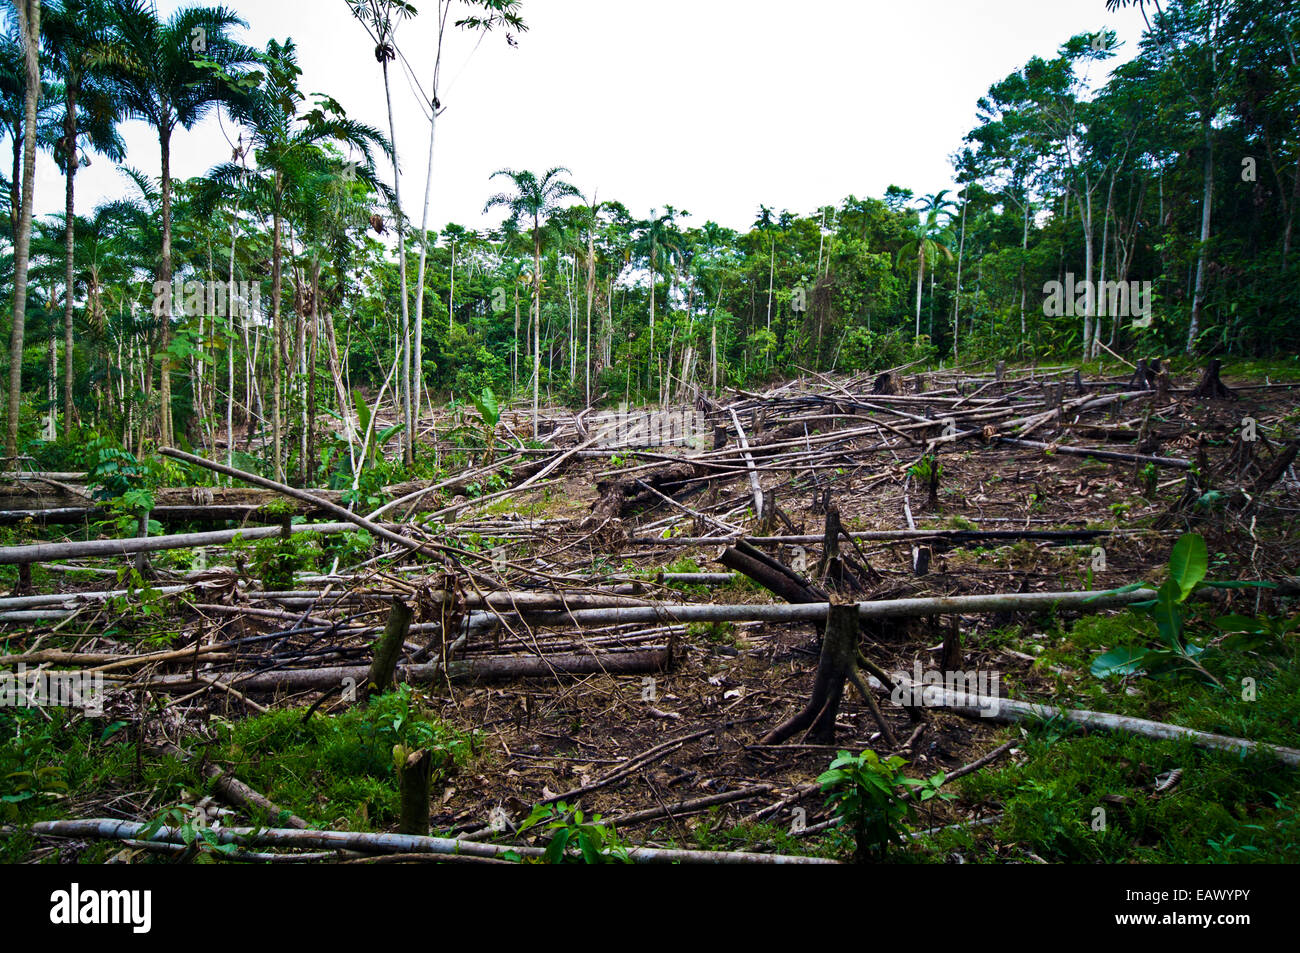 A stand of rainforest logged to create land for agriculture crops in the Amazon Basin. Stock Photo